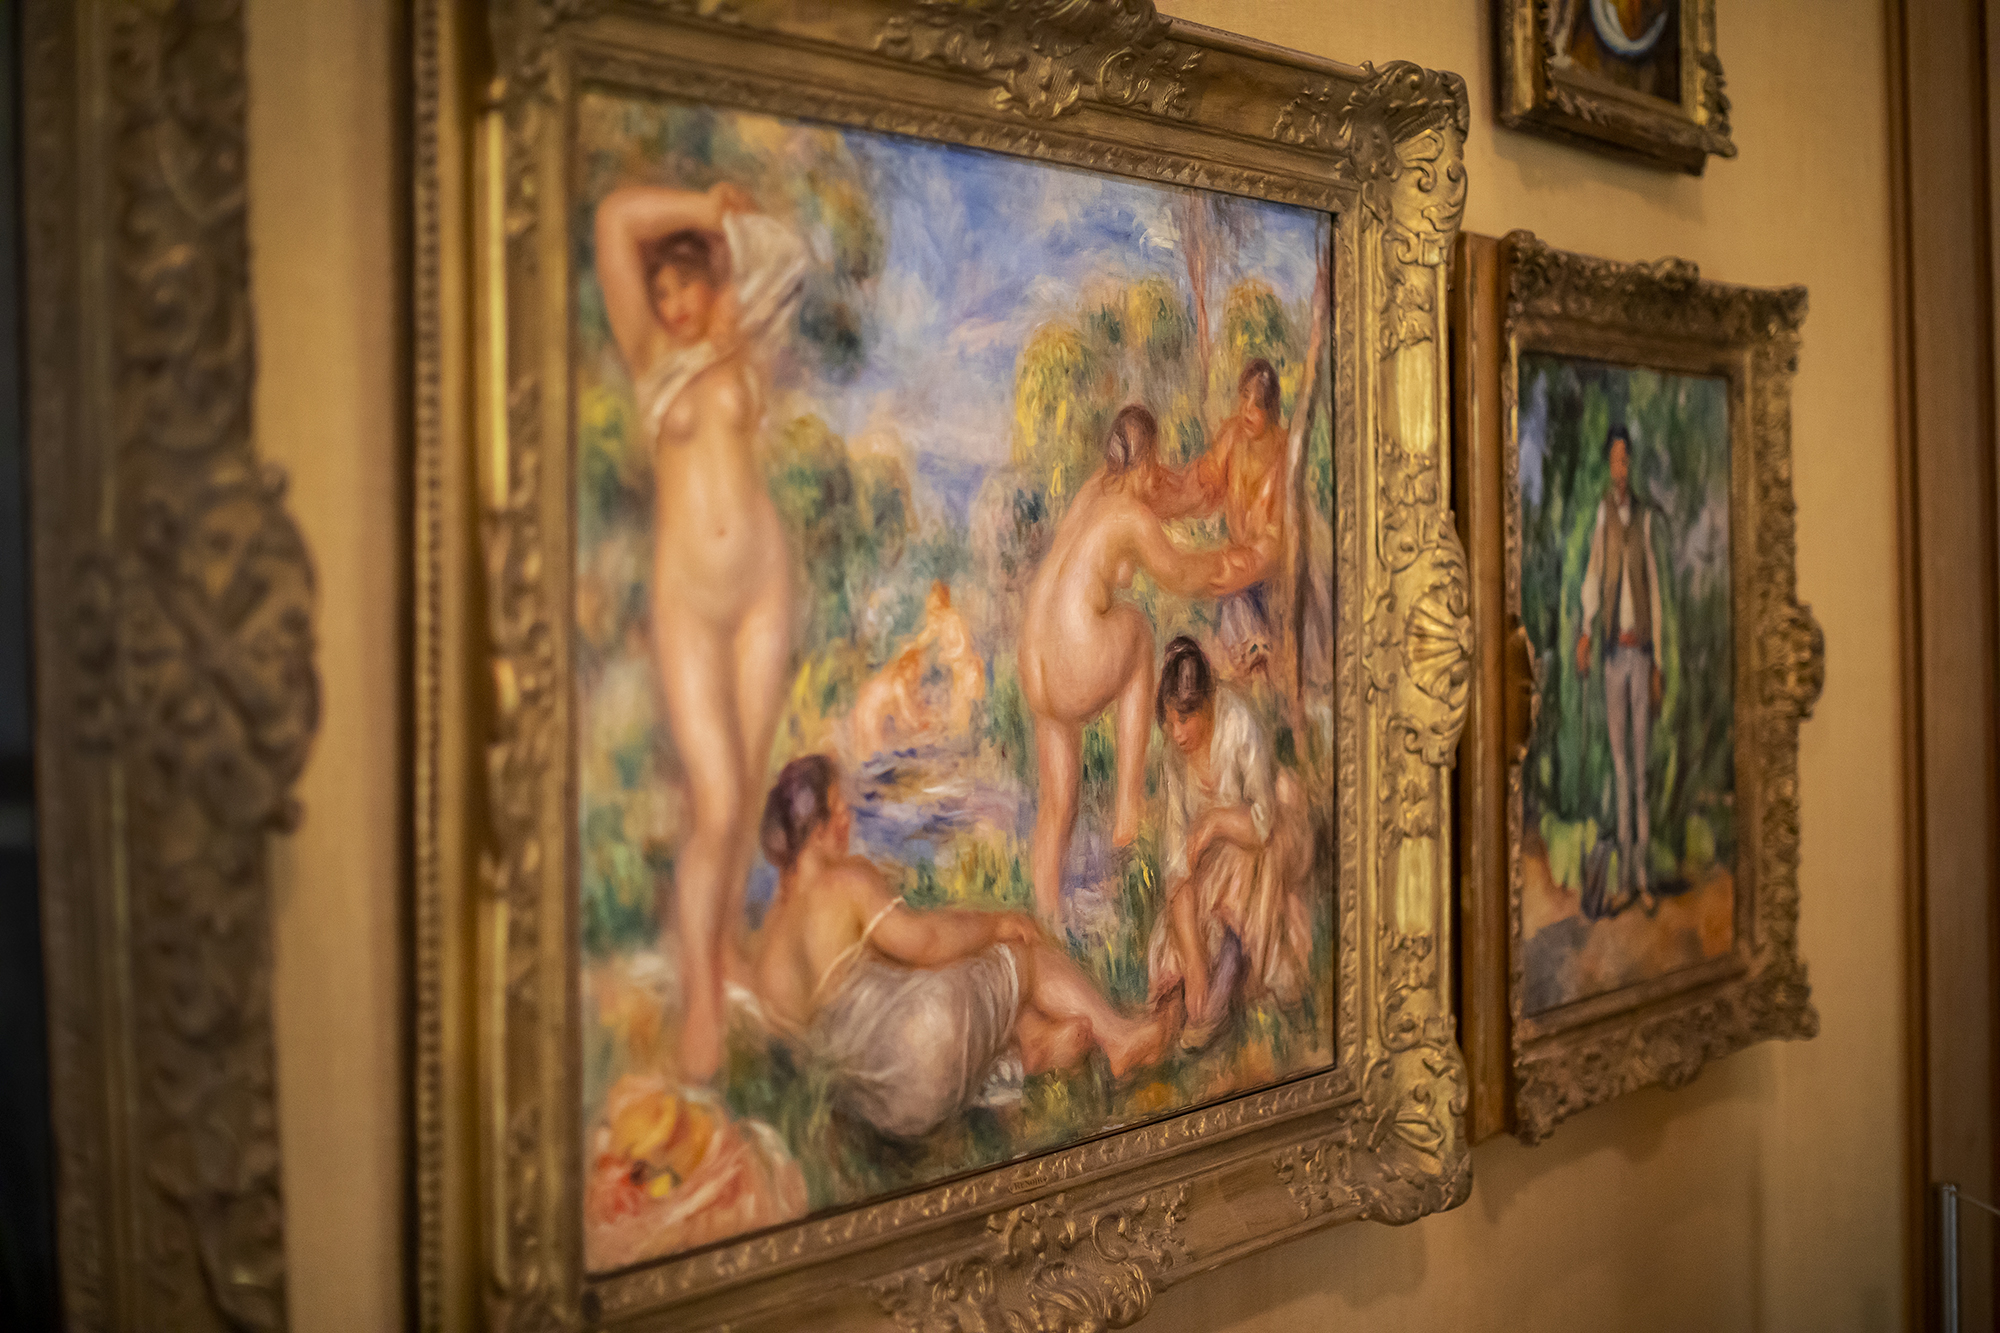 A Renoir painting of women, some nude, some dressed, in a blue and green landscape.